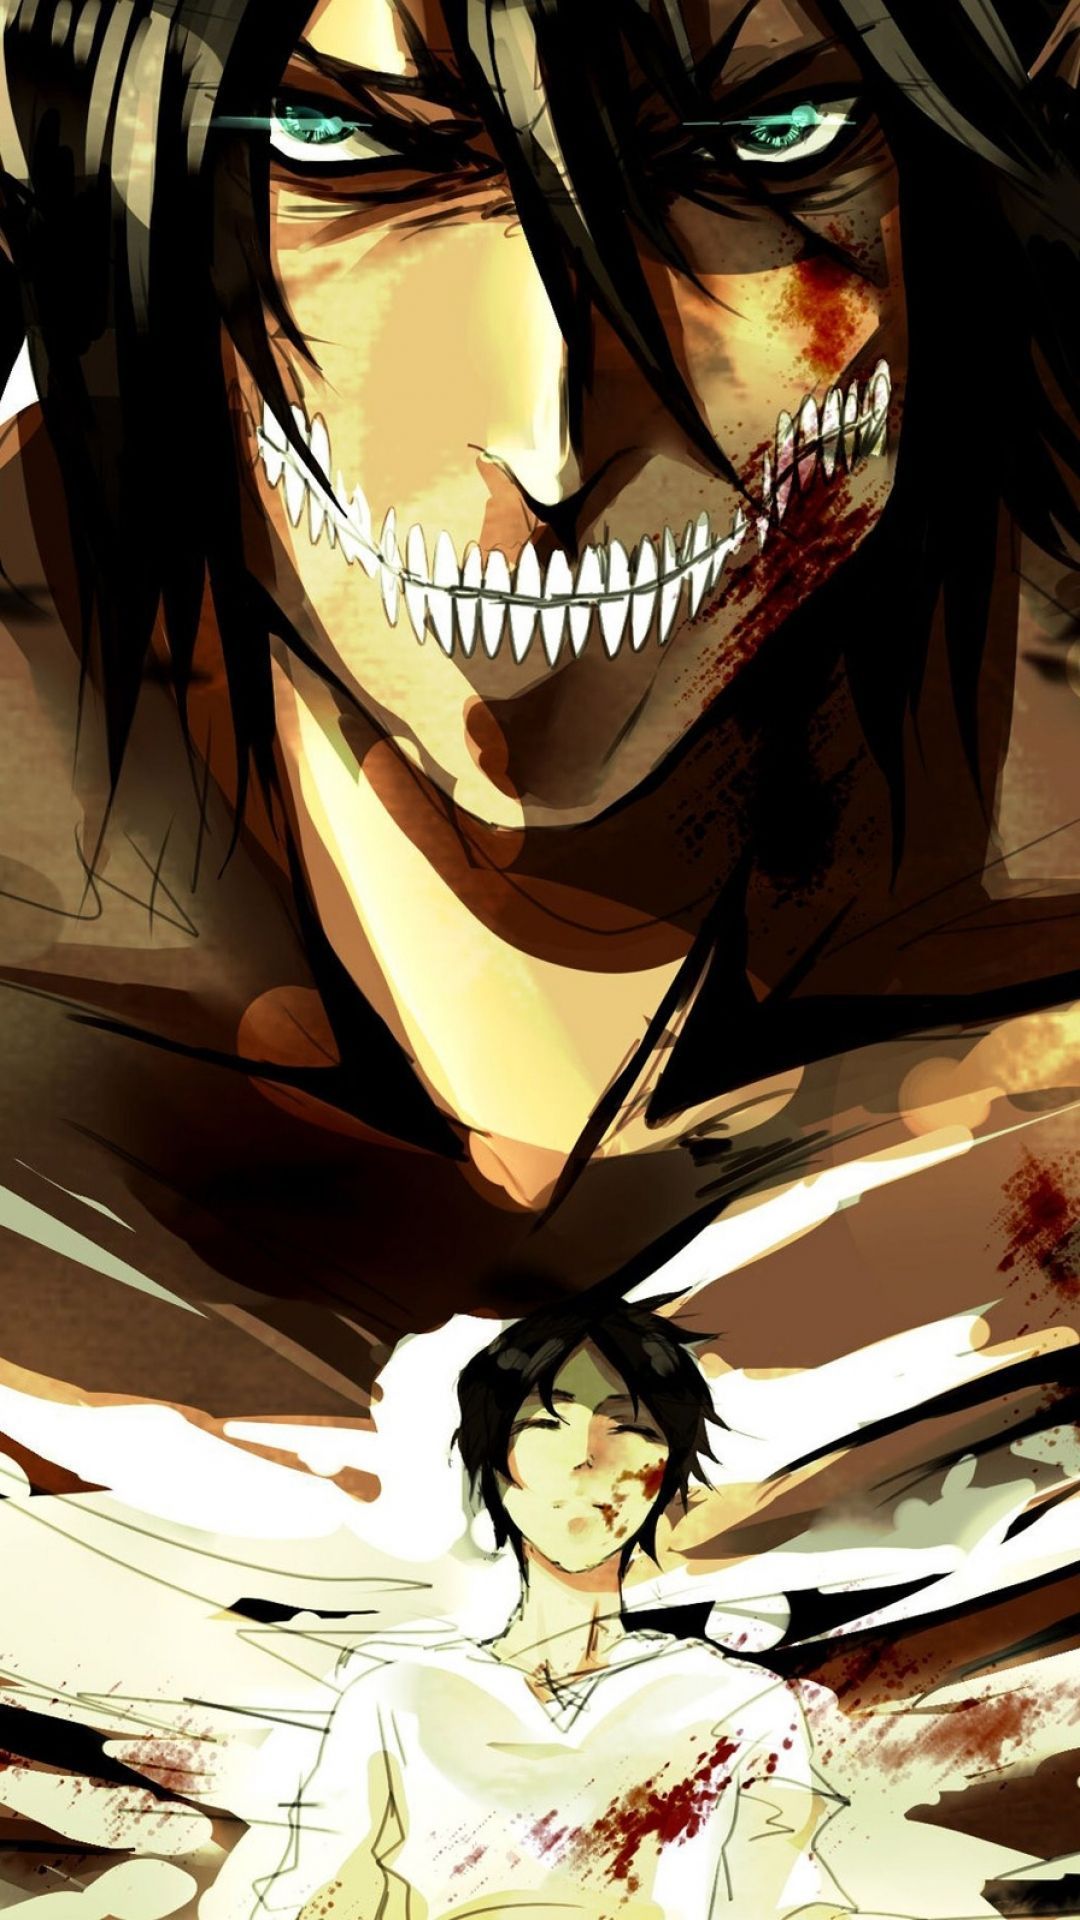 Attack On Titan iPhone Wallpaper Free Attack On Titan iPhone Background